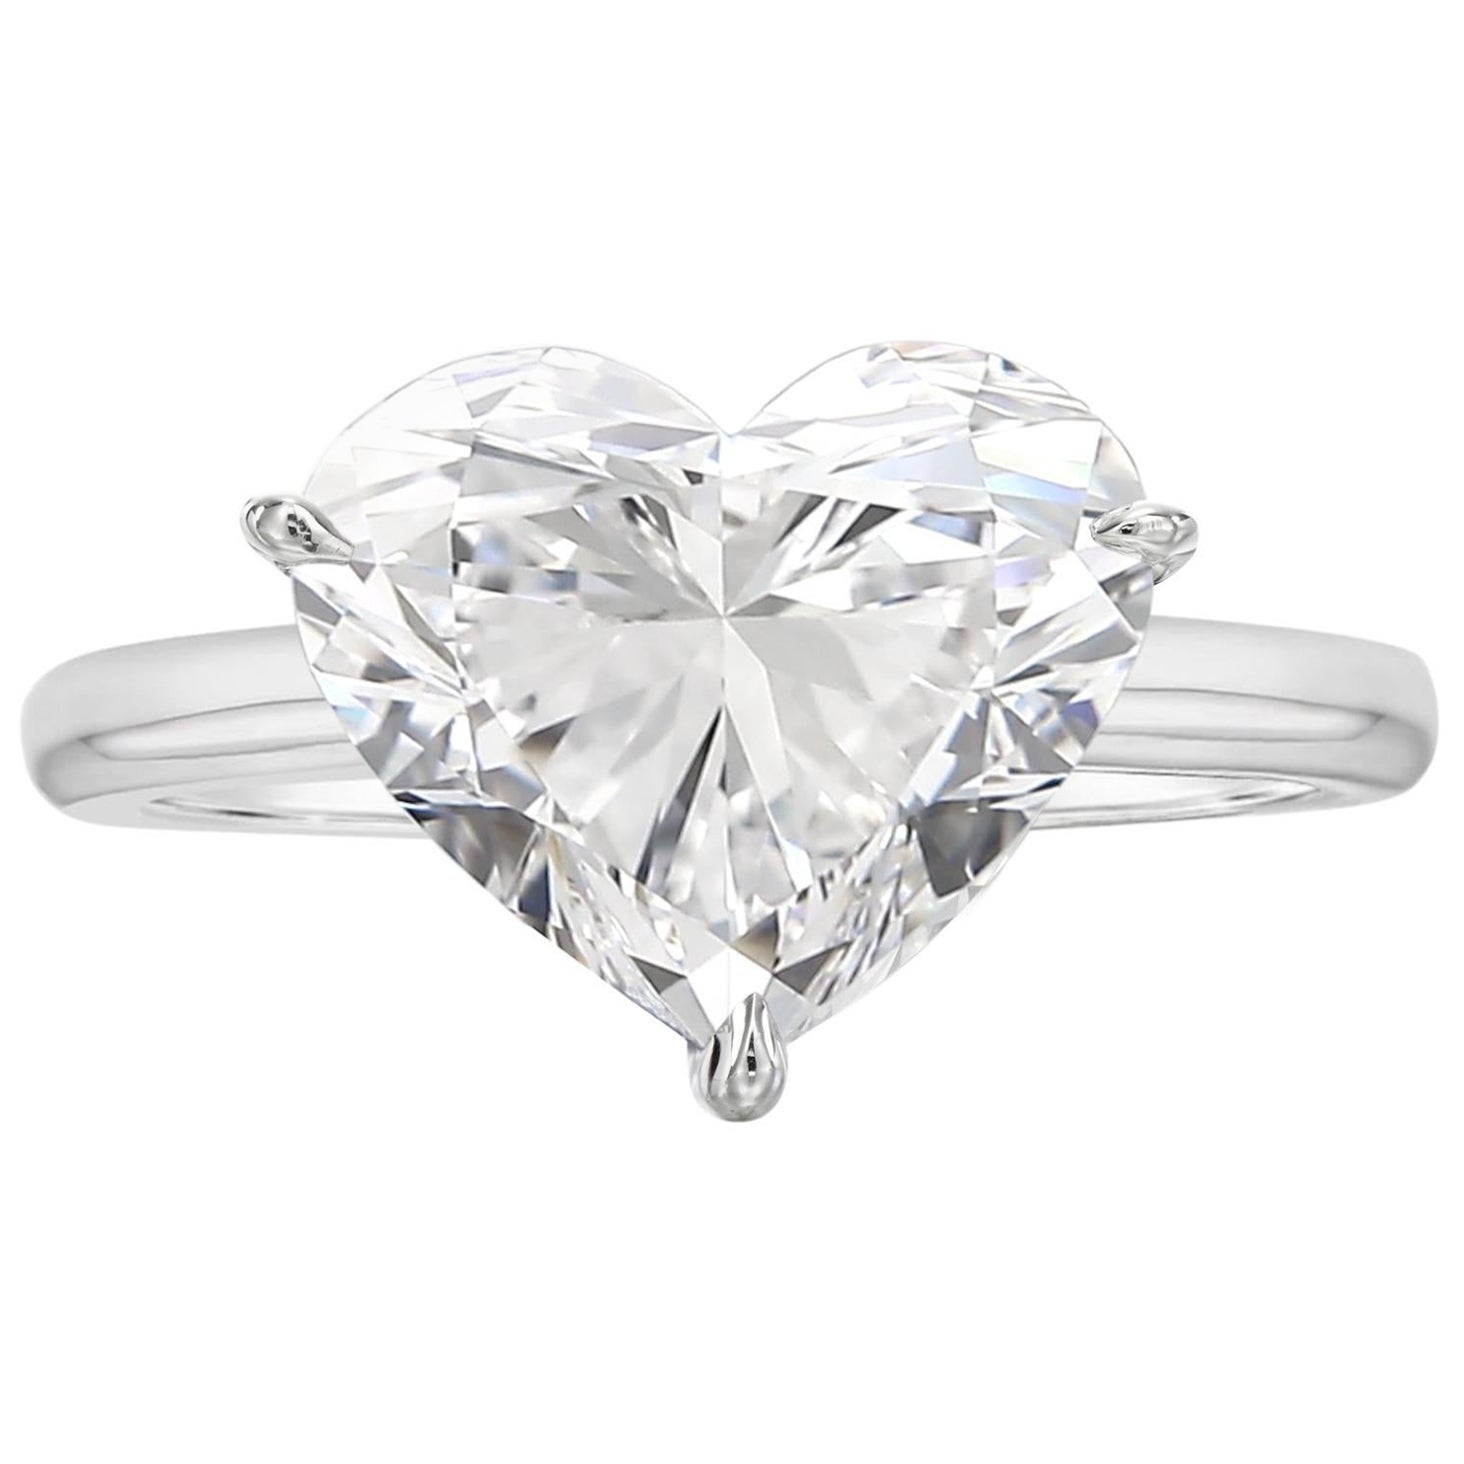 Exceptional GIA Certified 5 Carat Heart Shape Diamond Ring For Sale